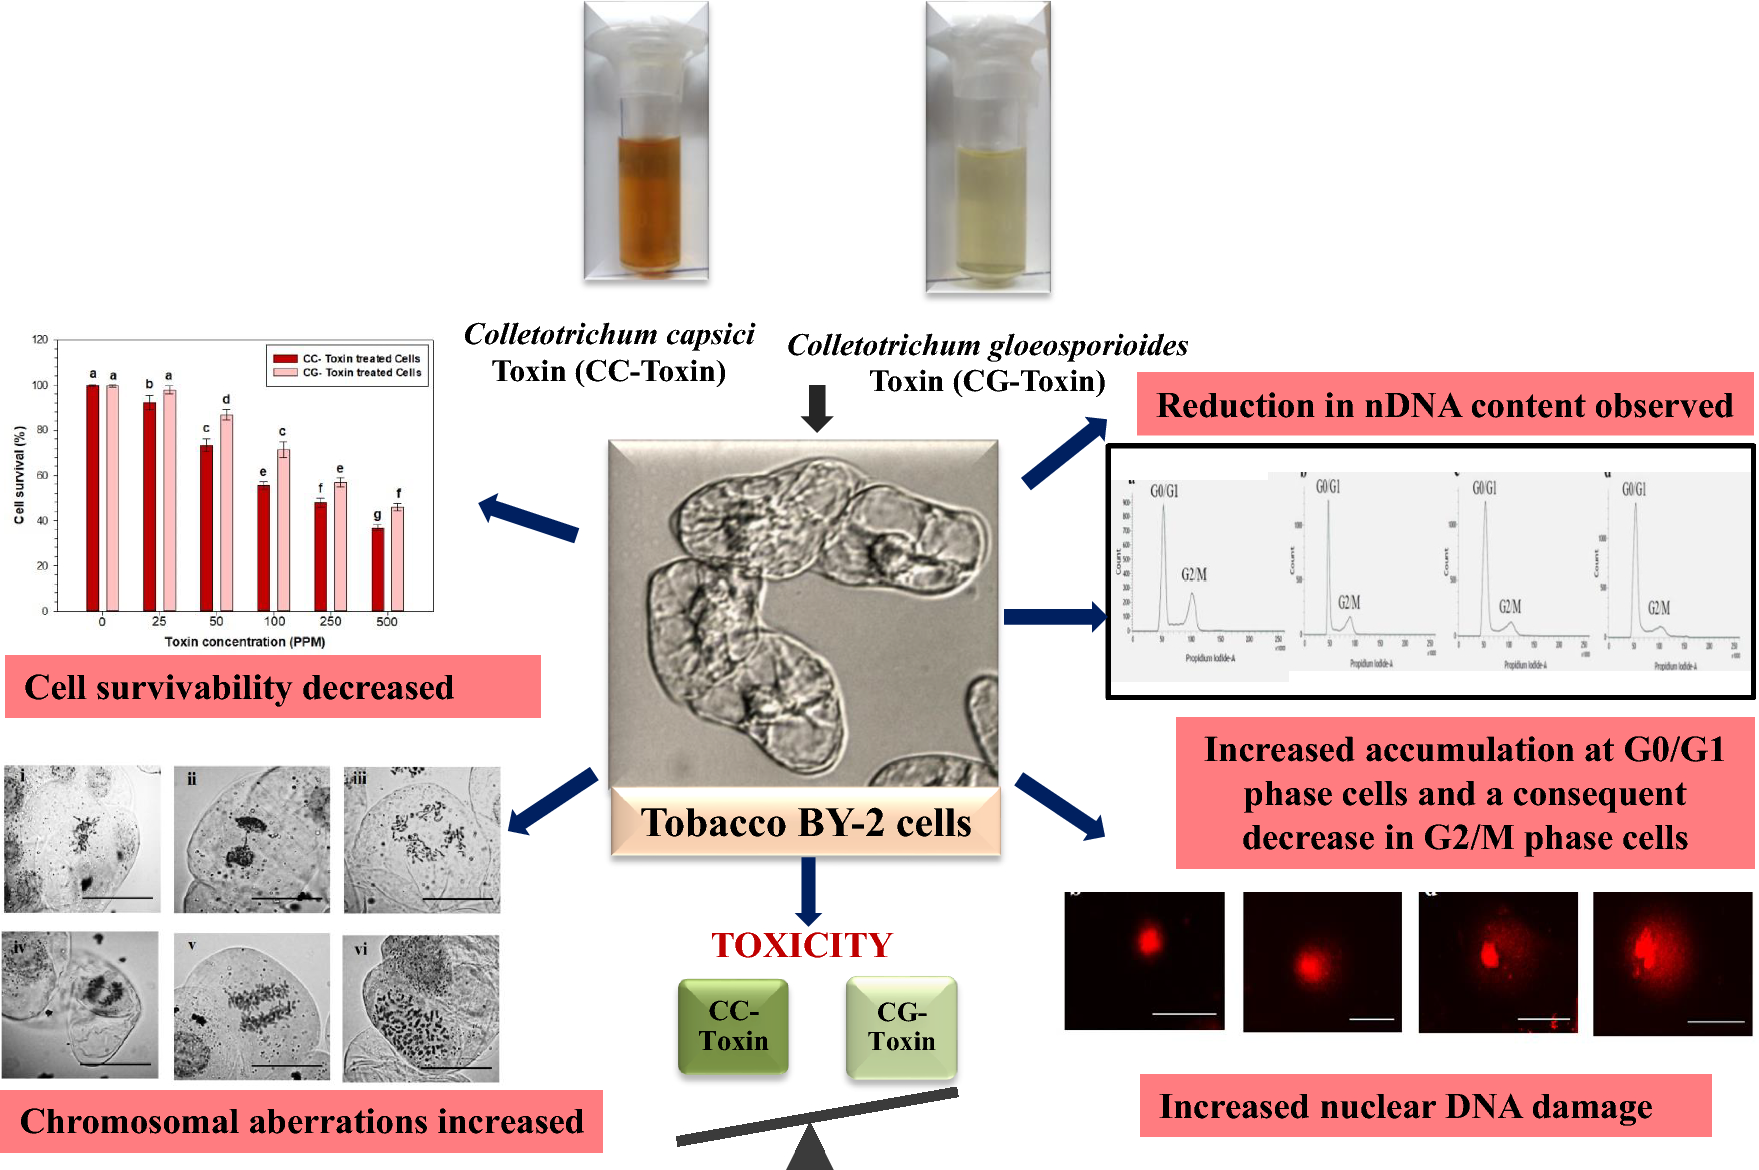 Assessment of cytotoxic and genotoxic effects of Colletotrichum gloeosporioides and C. capsici toxins on tobacco BY-2 cells